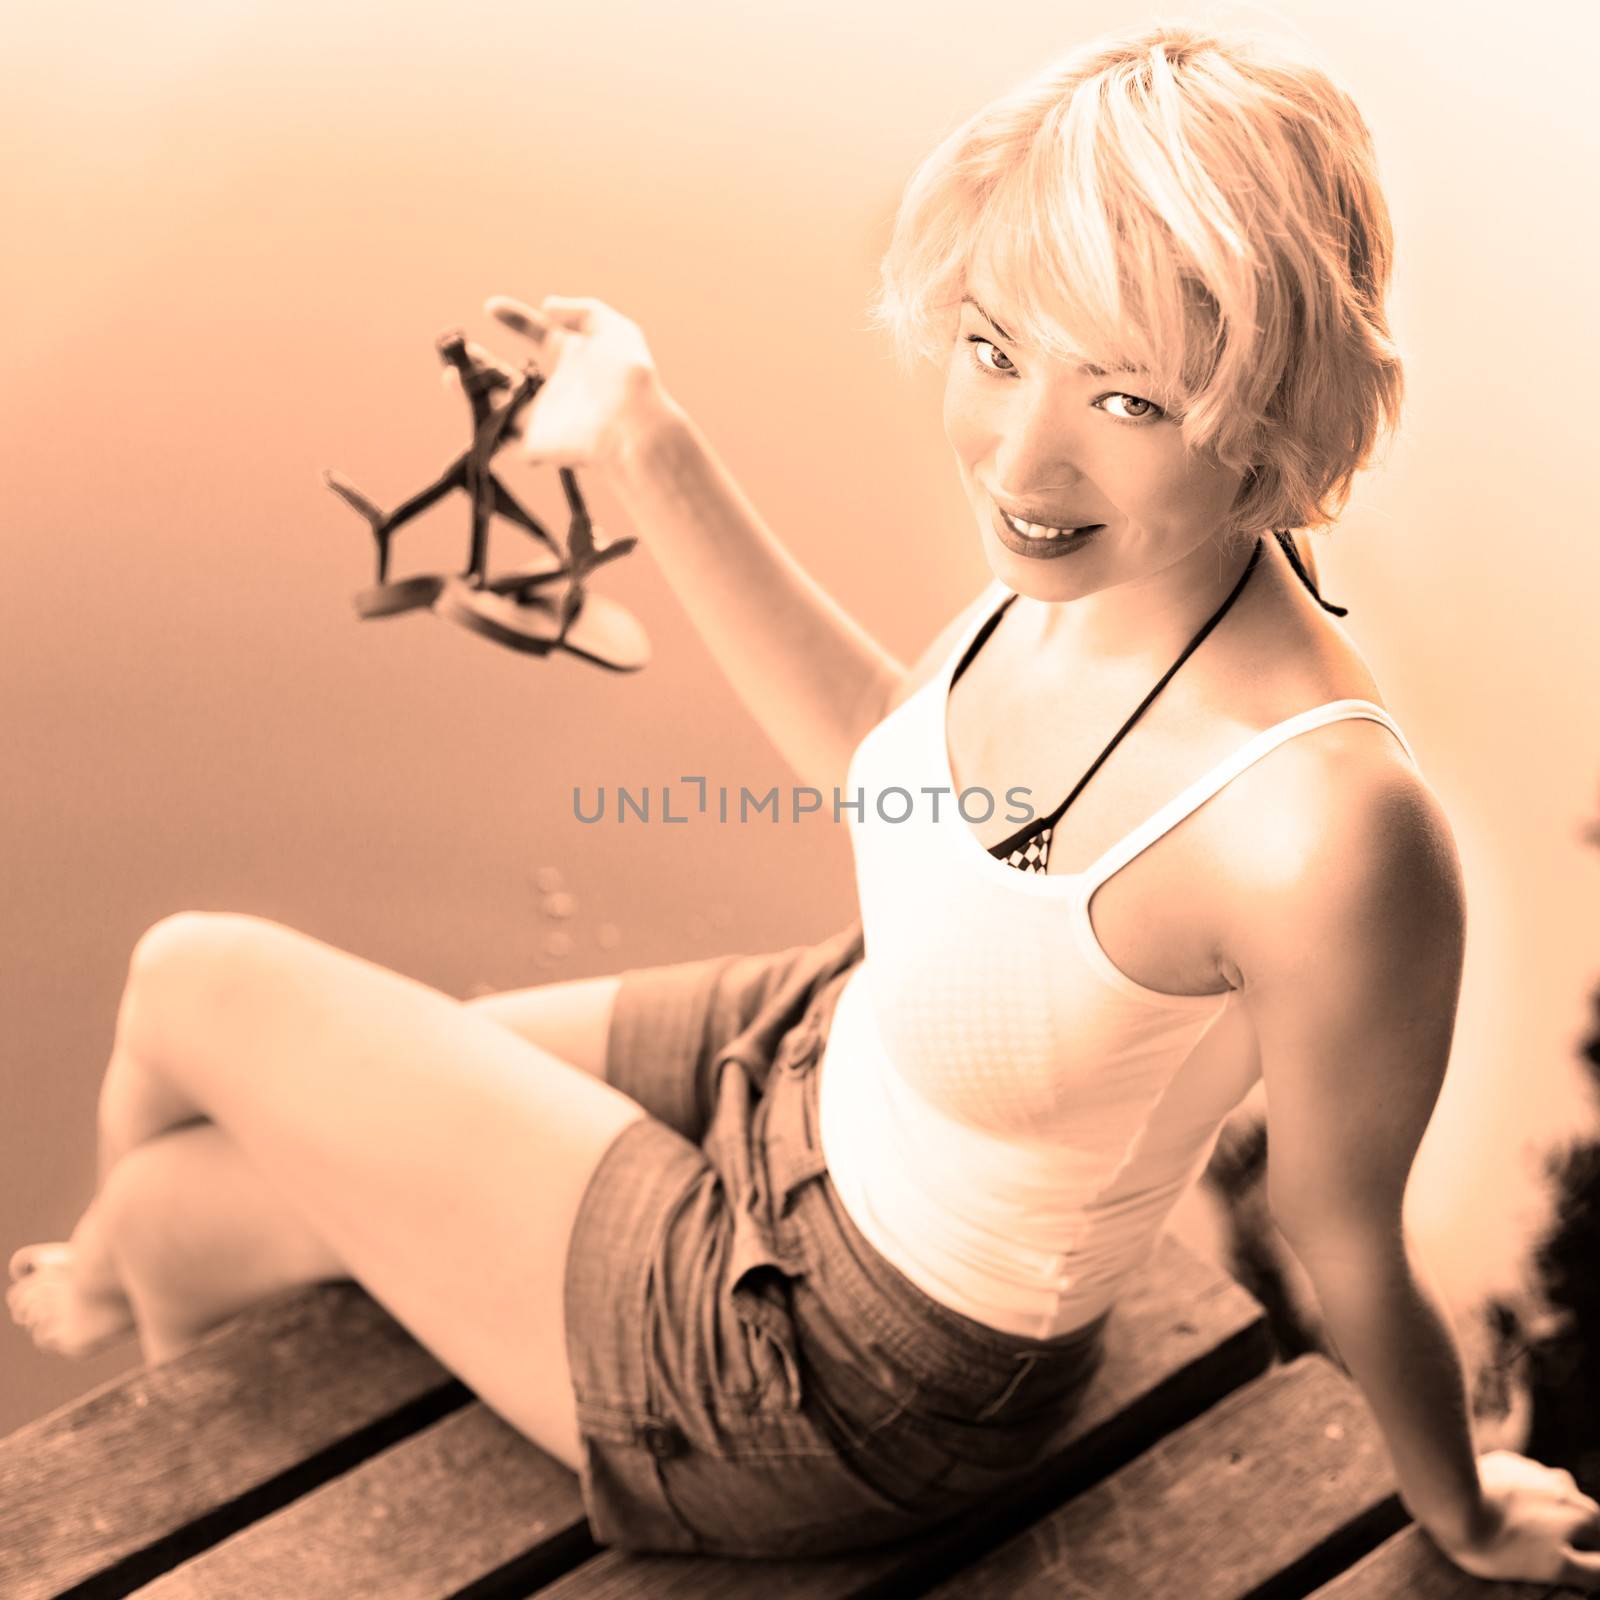 Romantiimage of beautiful carefree young blonde woman enjoying the sunny summer day on a vintage wooden pier on a lake in pure natural environment on the countryside; retro sepia toning.